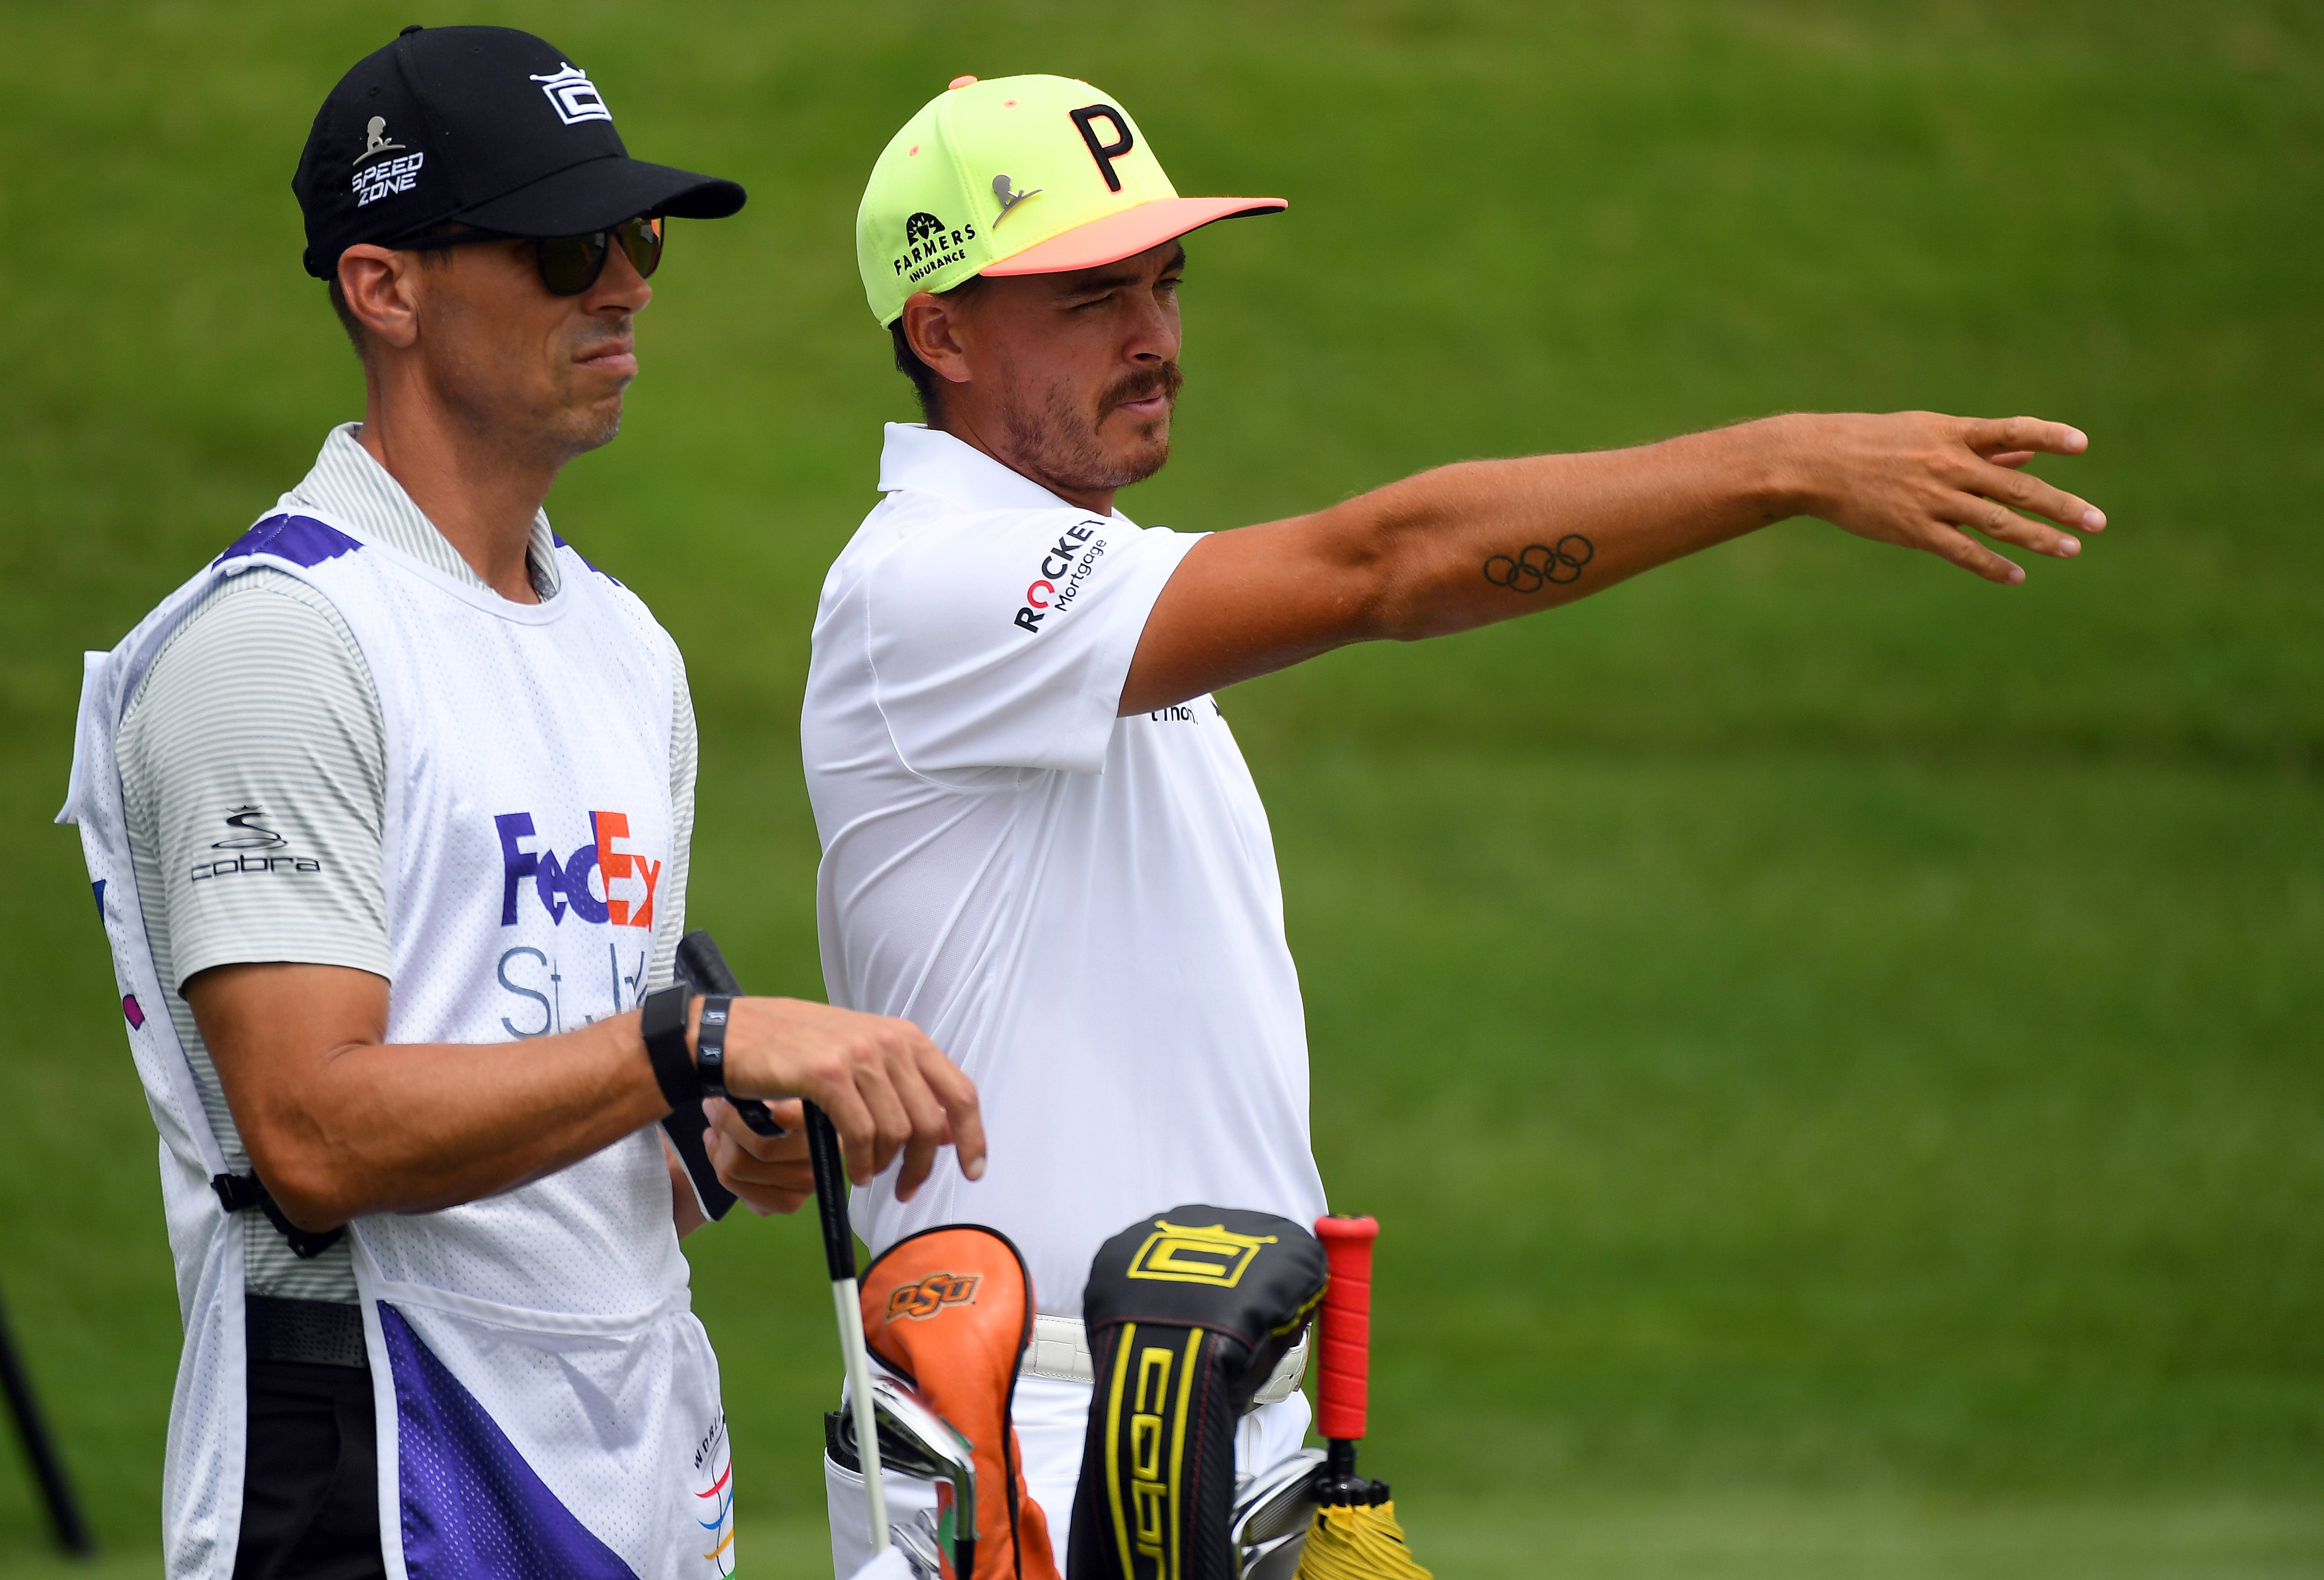 letter p on rickie fowler's hat